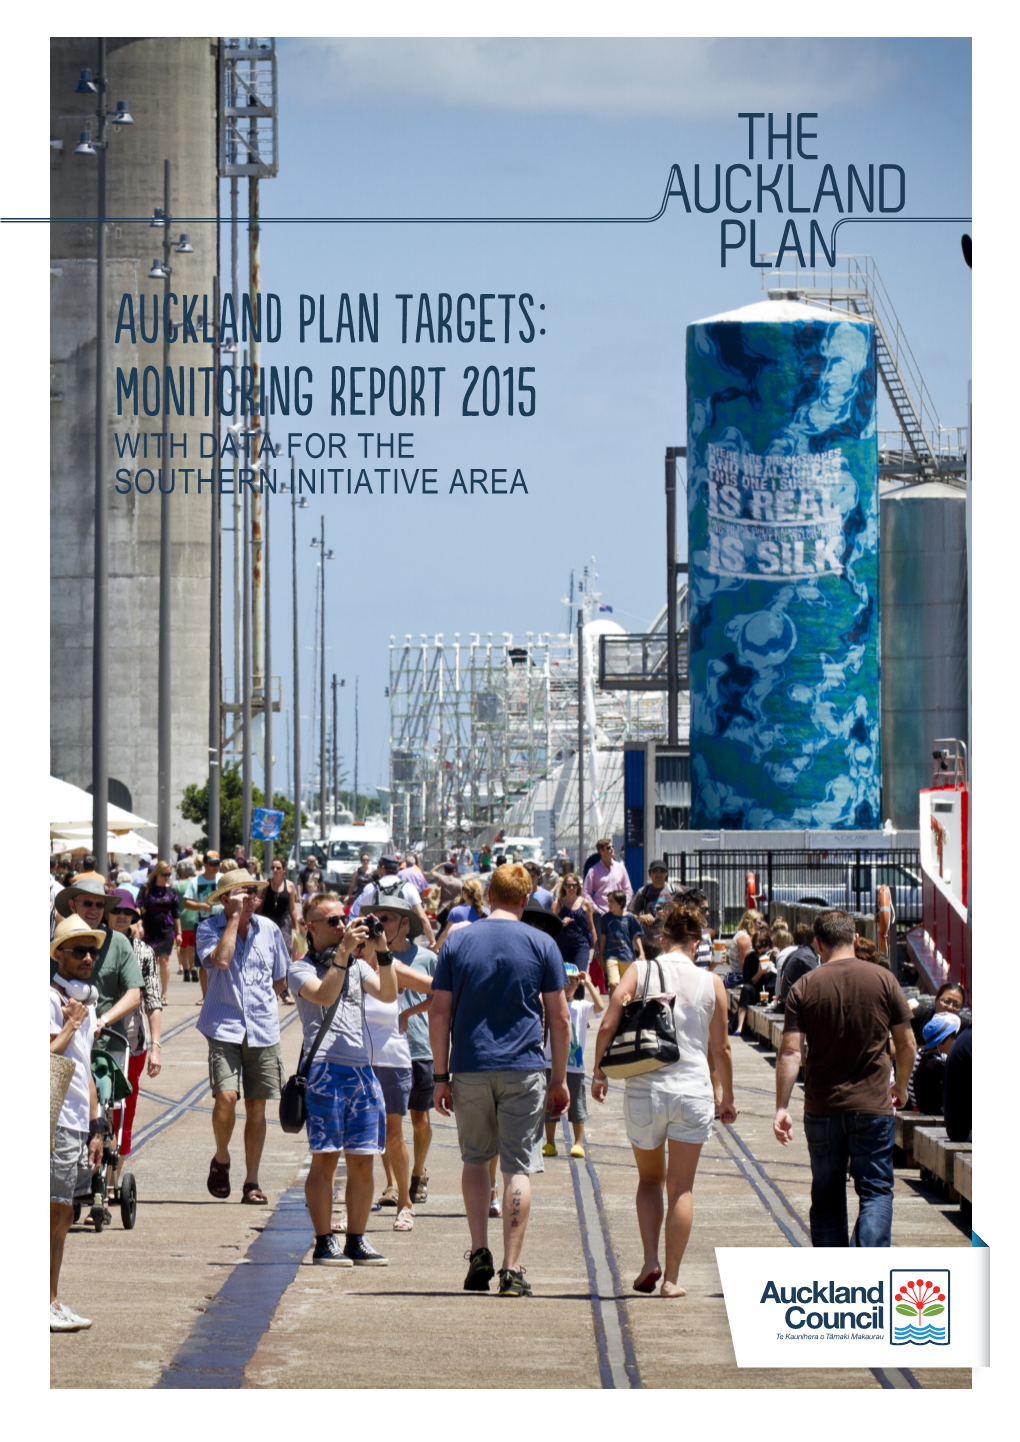 Auckland Plan Targets: Monitoring Report 2015 with DATA for the SOUTHERN INITIATIVE AREA